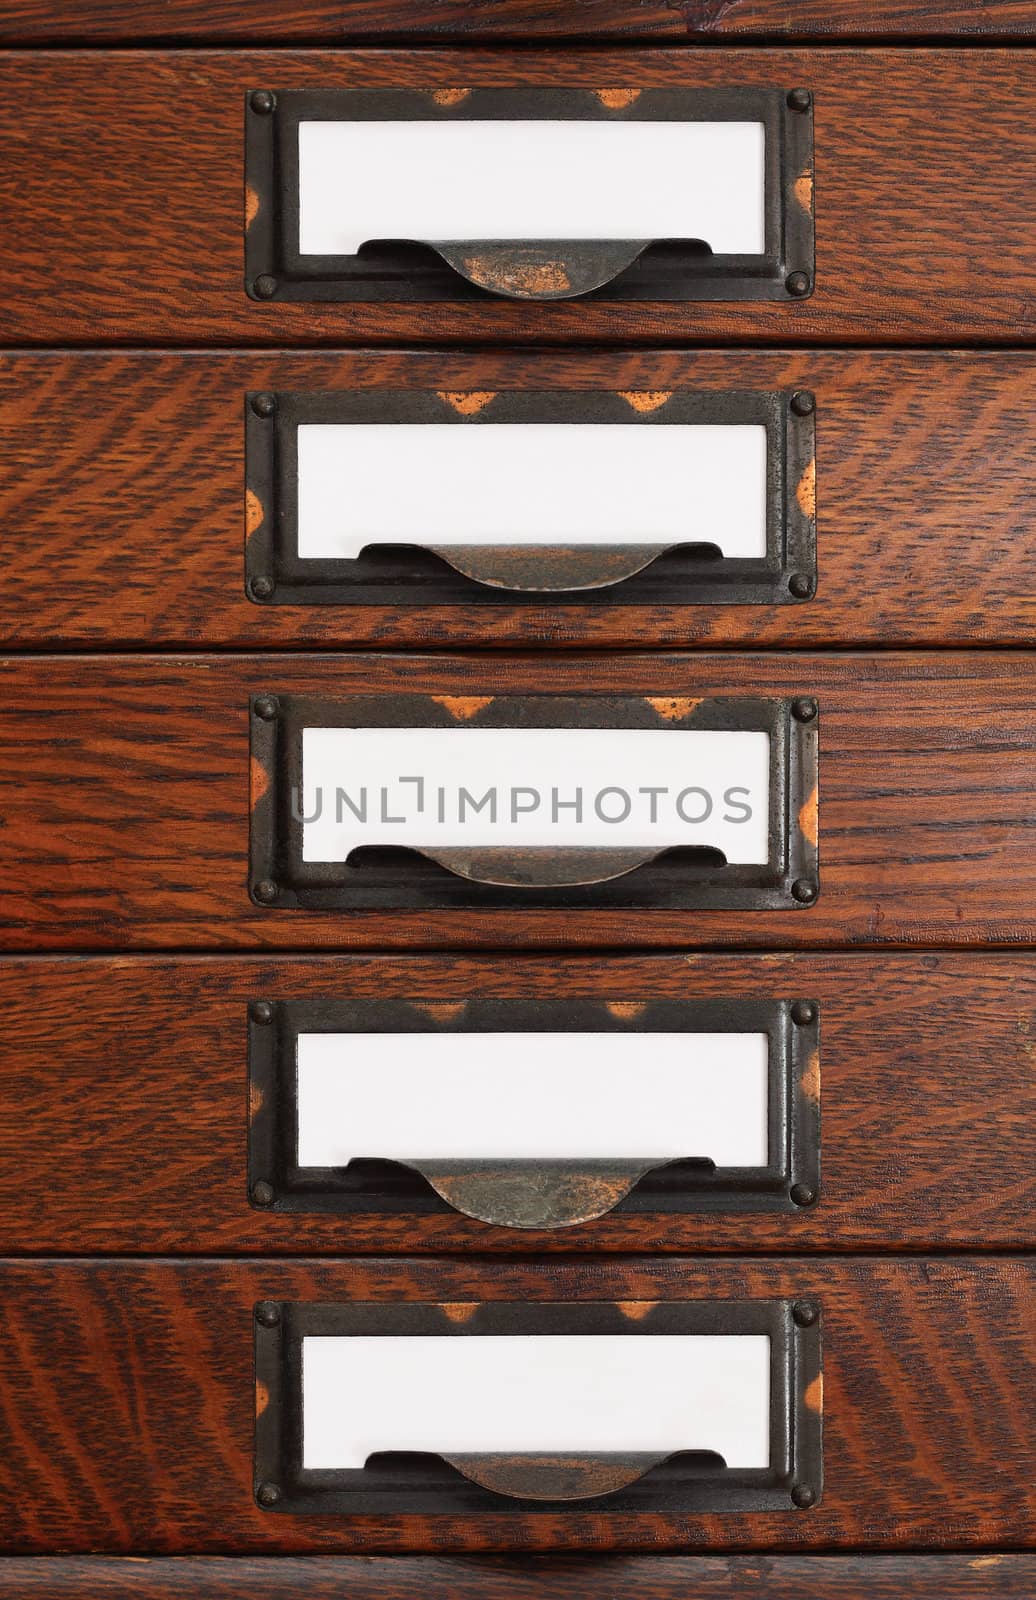 Vertical stack of five old oak flat file drawers with white empty tags in tarnished brass label holders.